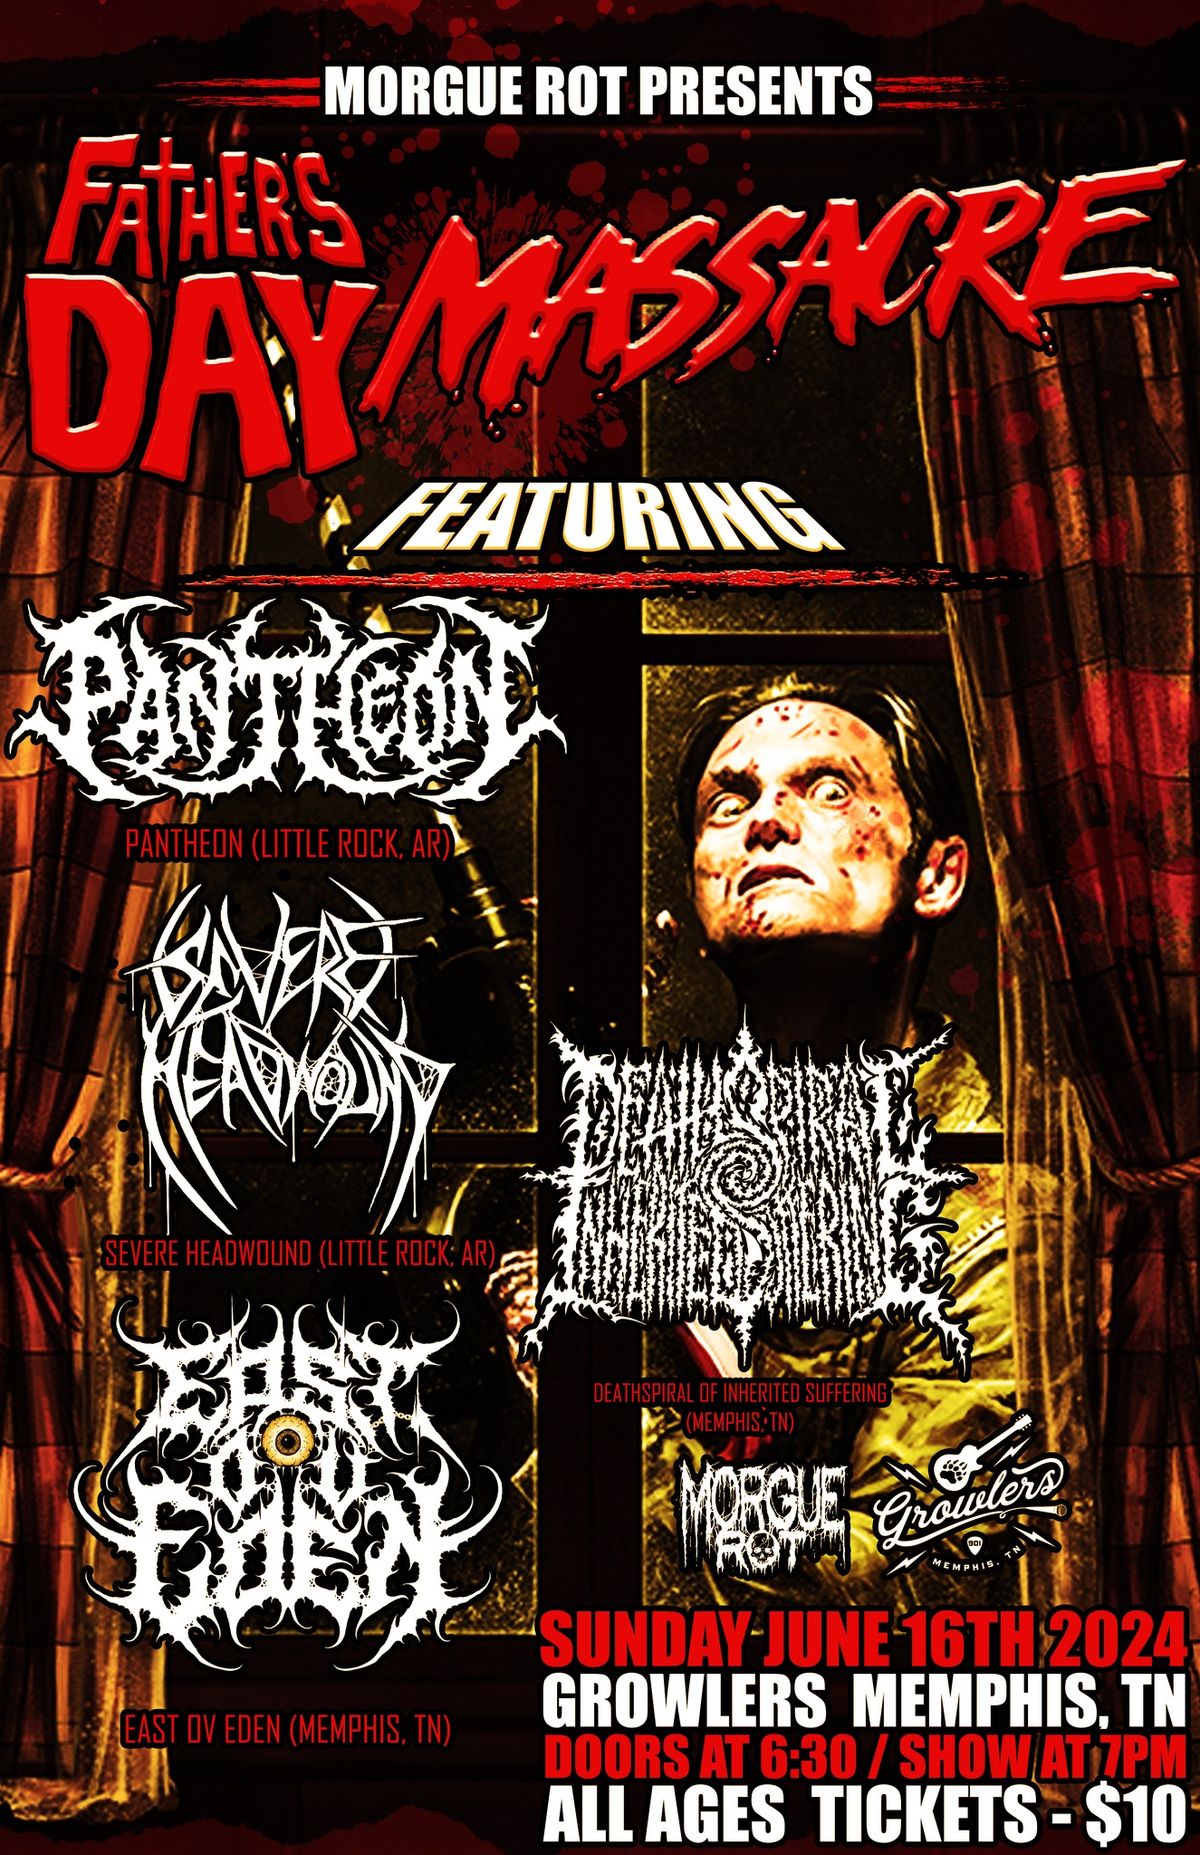 Morgue Rot presents " Father's Day Massacre "